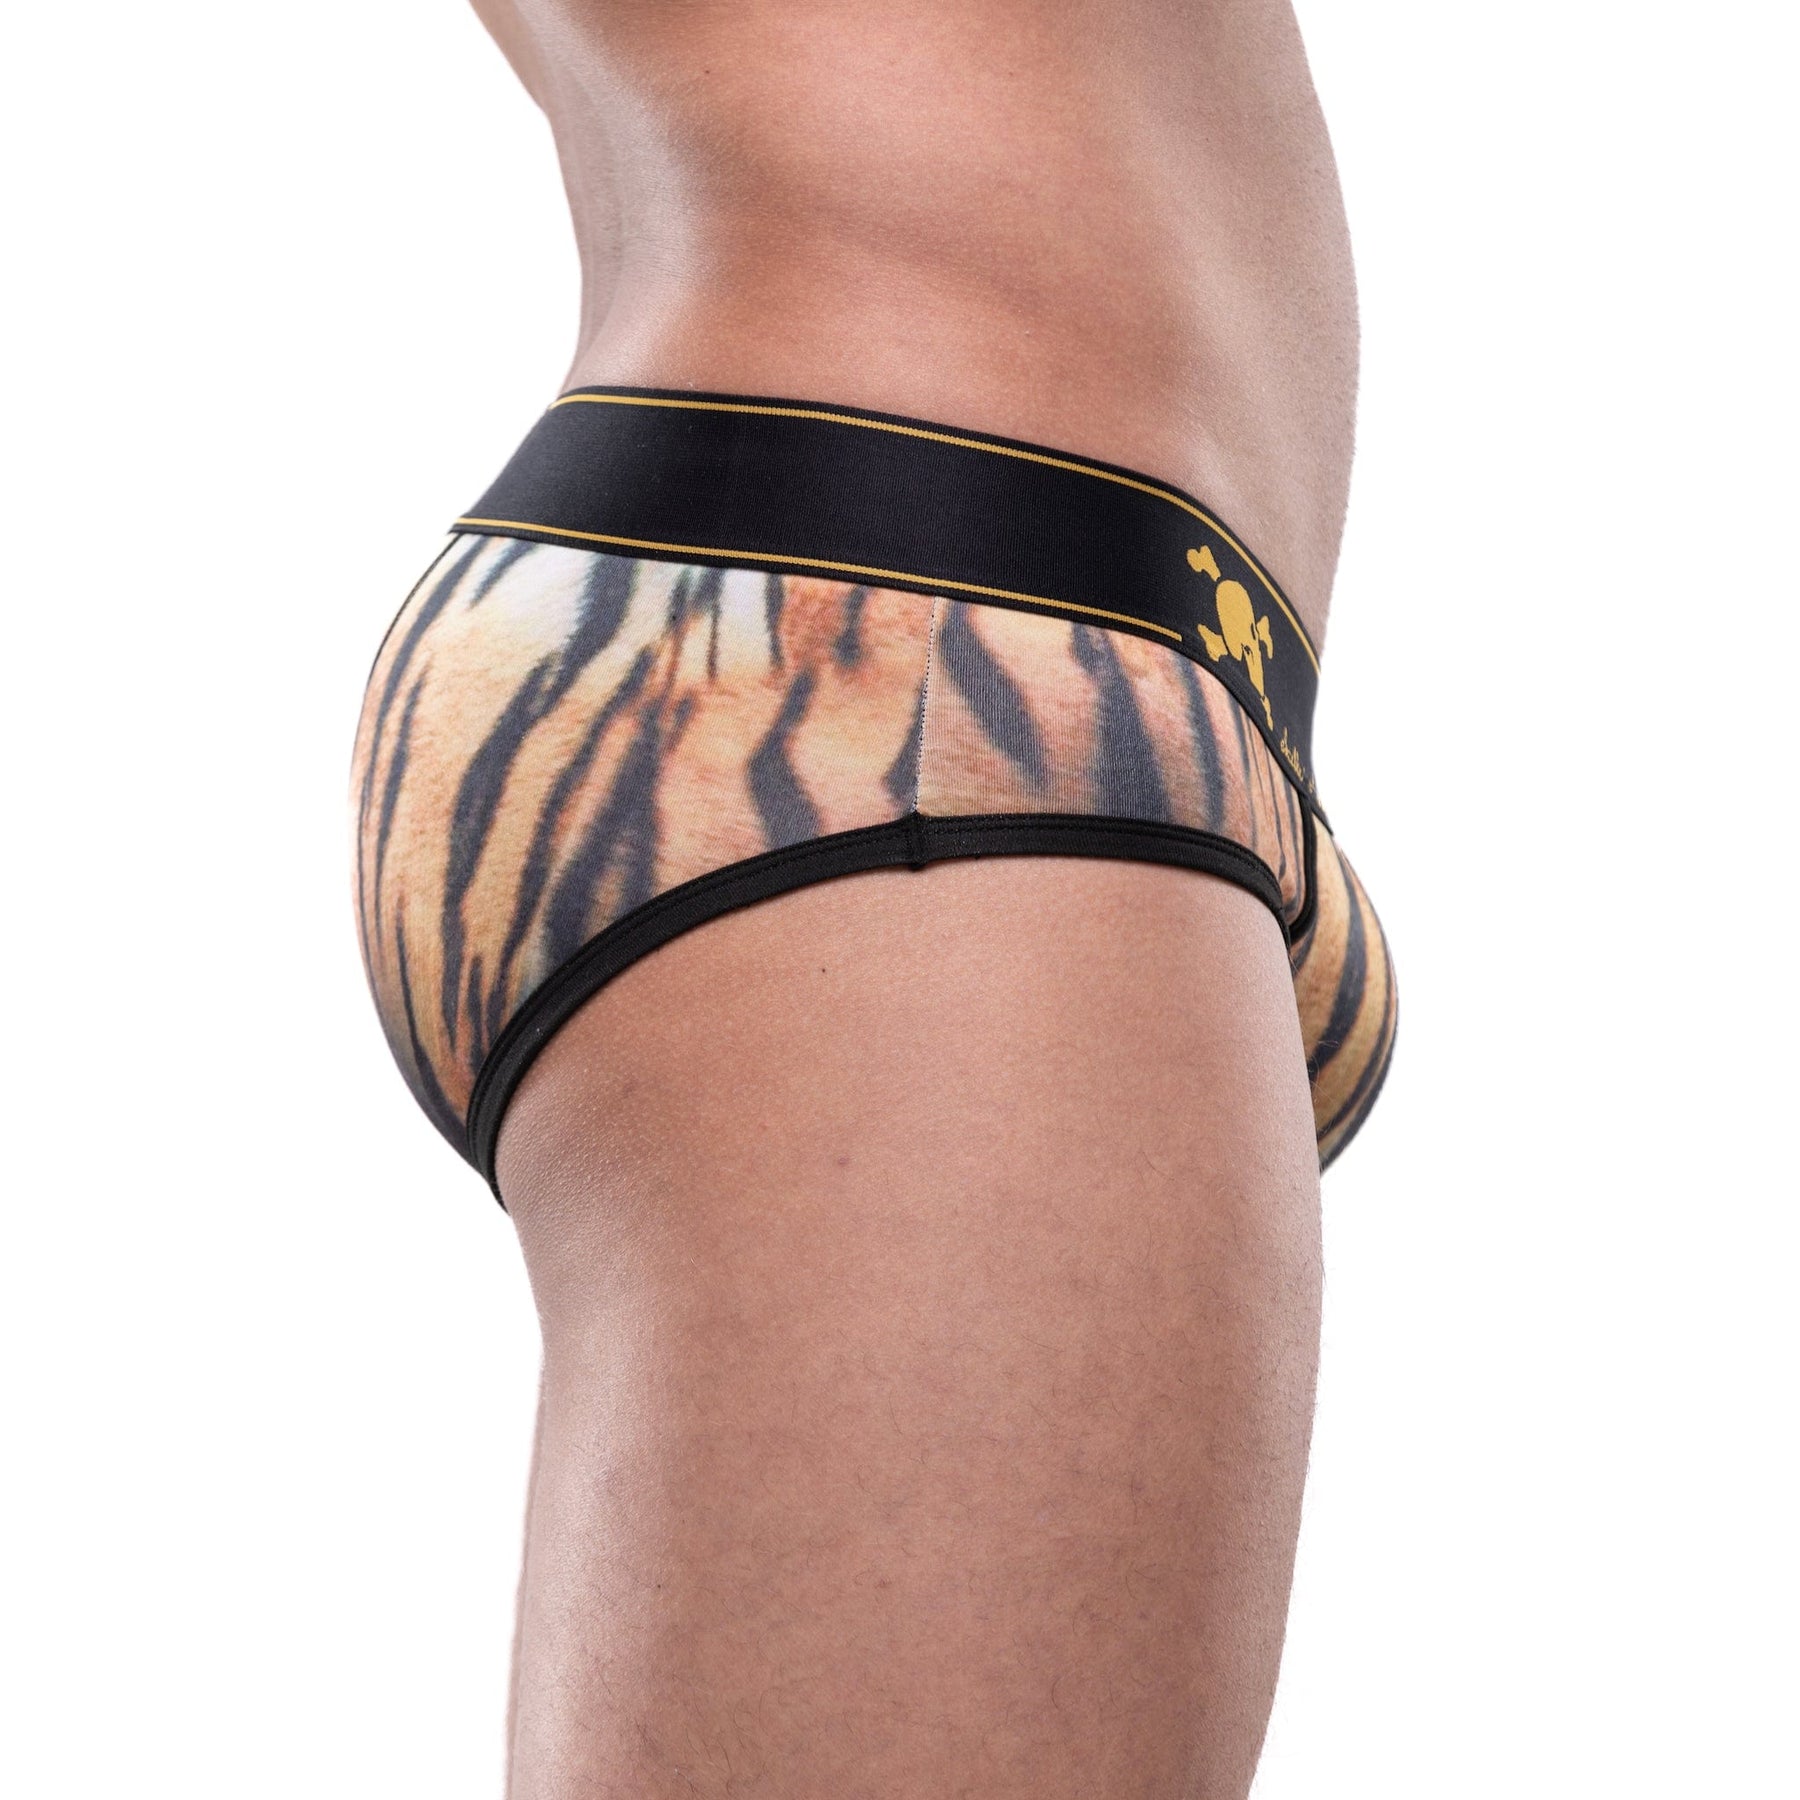 Tiger Underwear Outlet and Save 50%